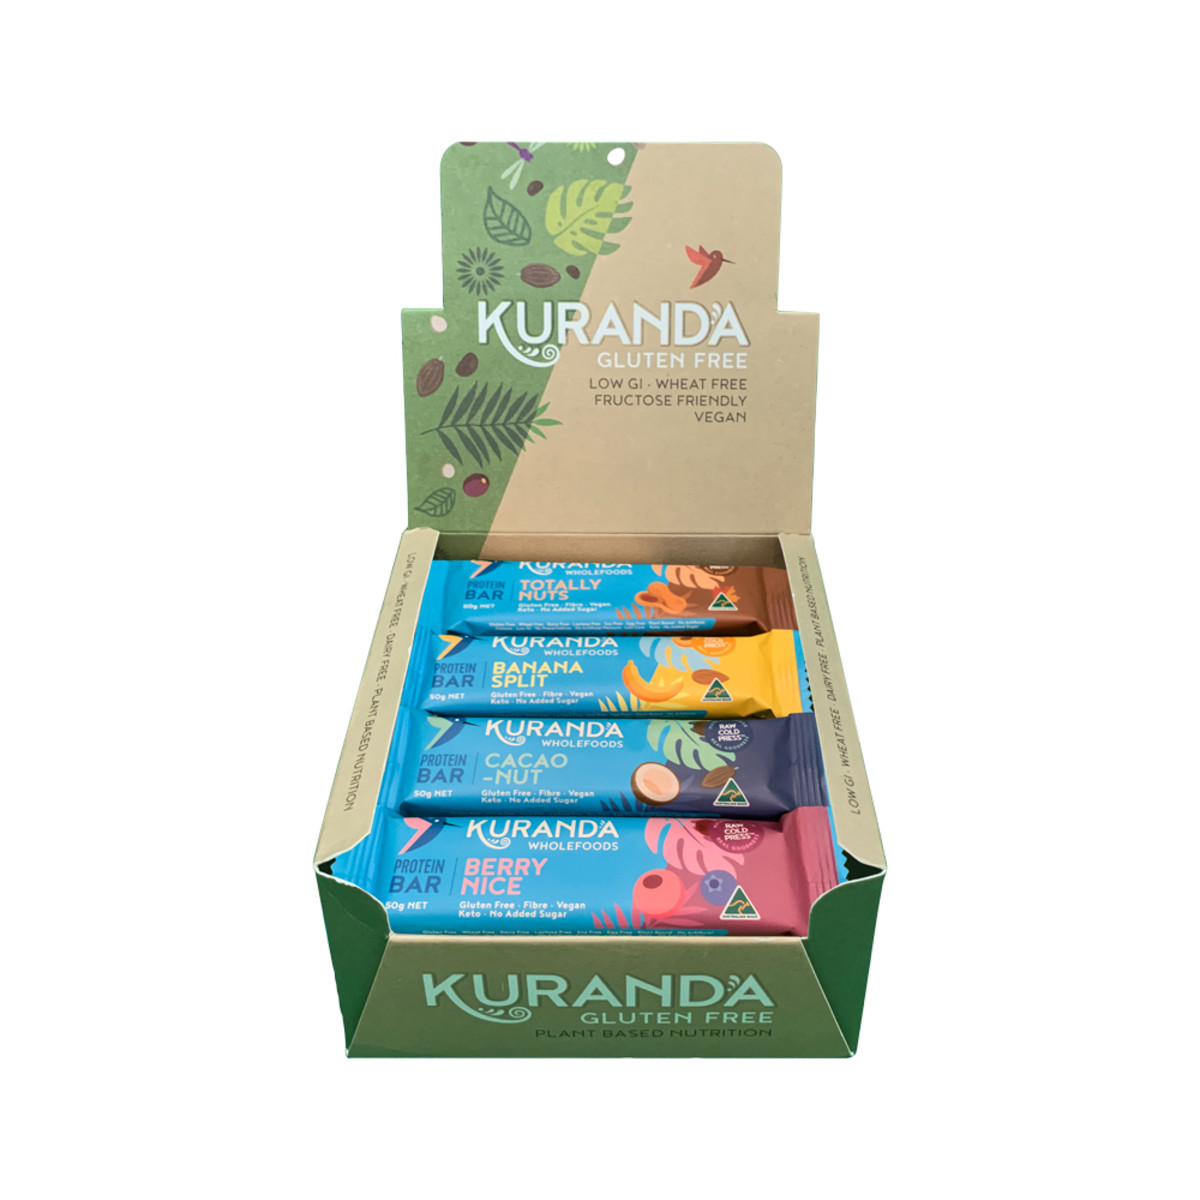 KURANDA - WHOLEFOODS Gluten Free Protein Bars Mixed 50g Display  contains: 4 of each flavour)